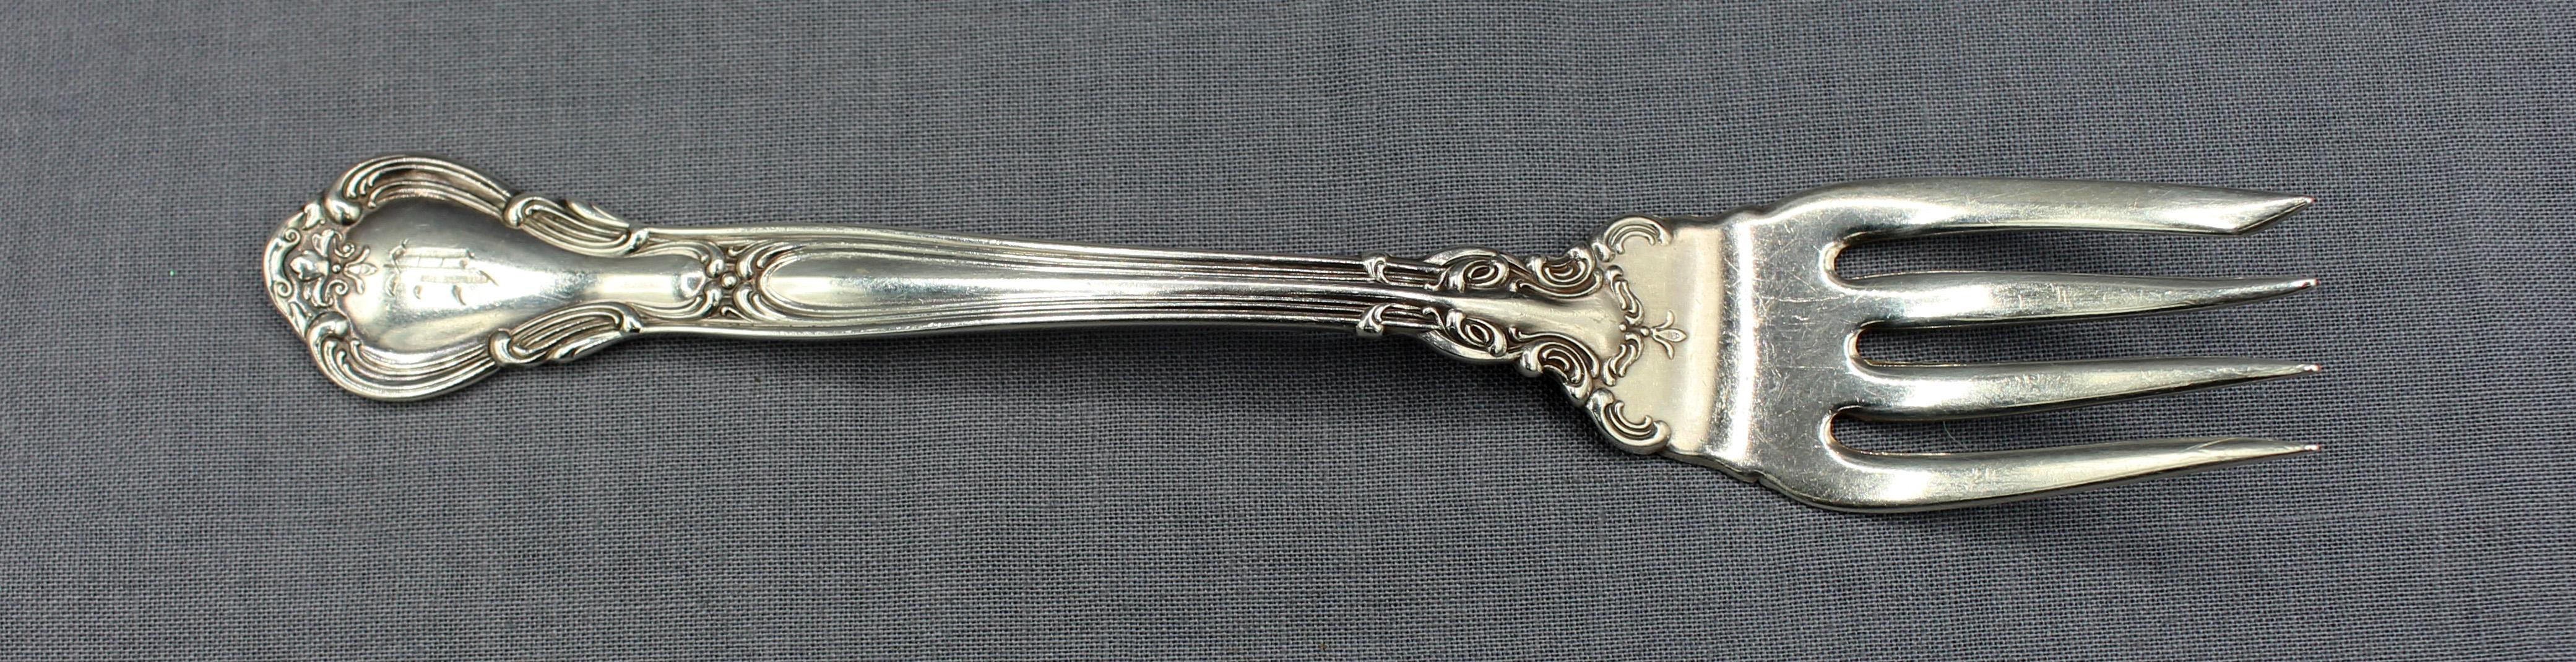 Rococo Set of 4 c. 1895-1950 Chantilly Sterling Fish Forks by Gorham For Sale